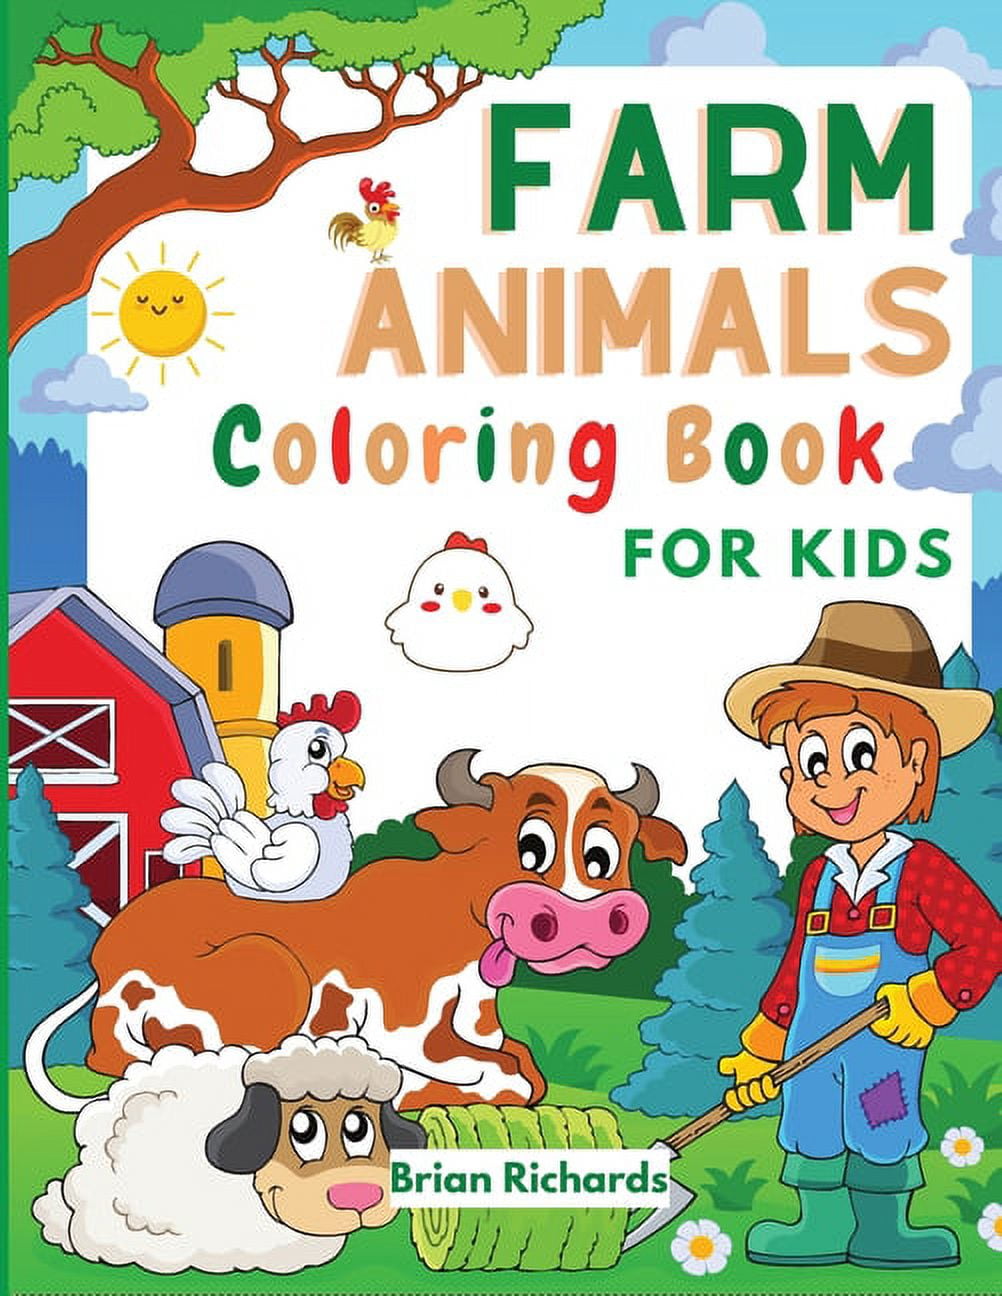 Barnes and Noble DONKEY Coloring Book For Girls Ages 6-8: Funny Kids  Coloring Book Featuring With Funny, Cute And Realistic Donkey (Unique gifts  for Children's)